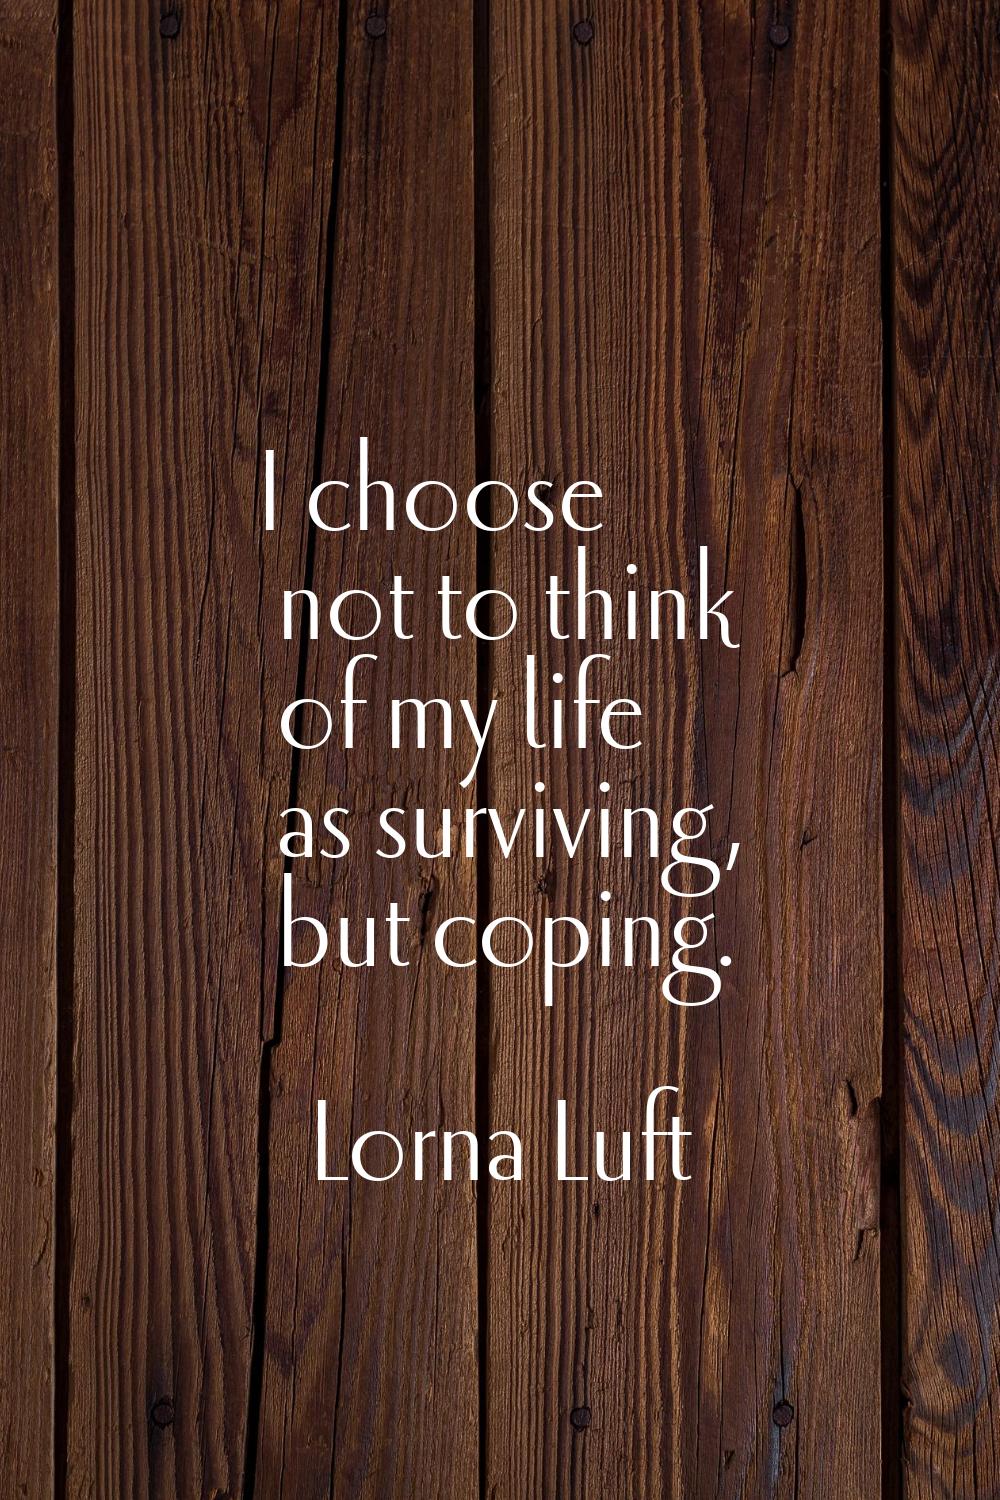 I choose not to think of my life as surviving, but coping.